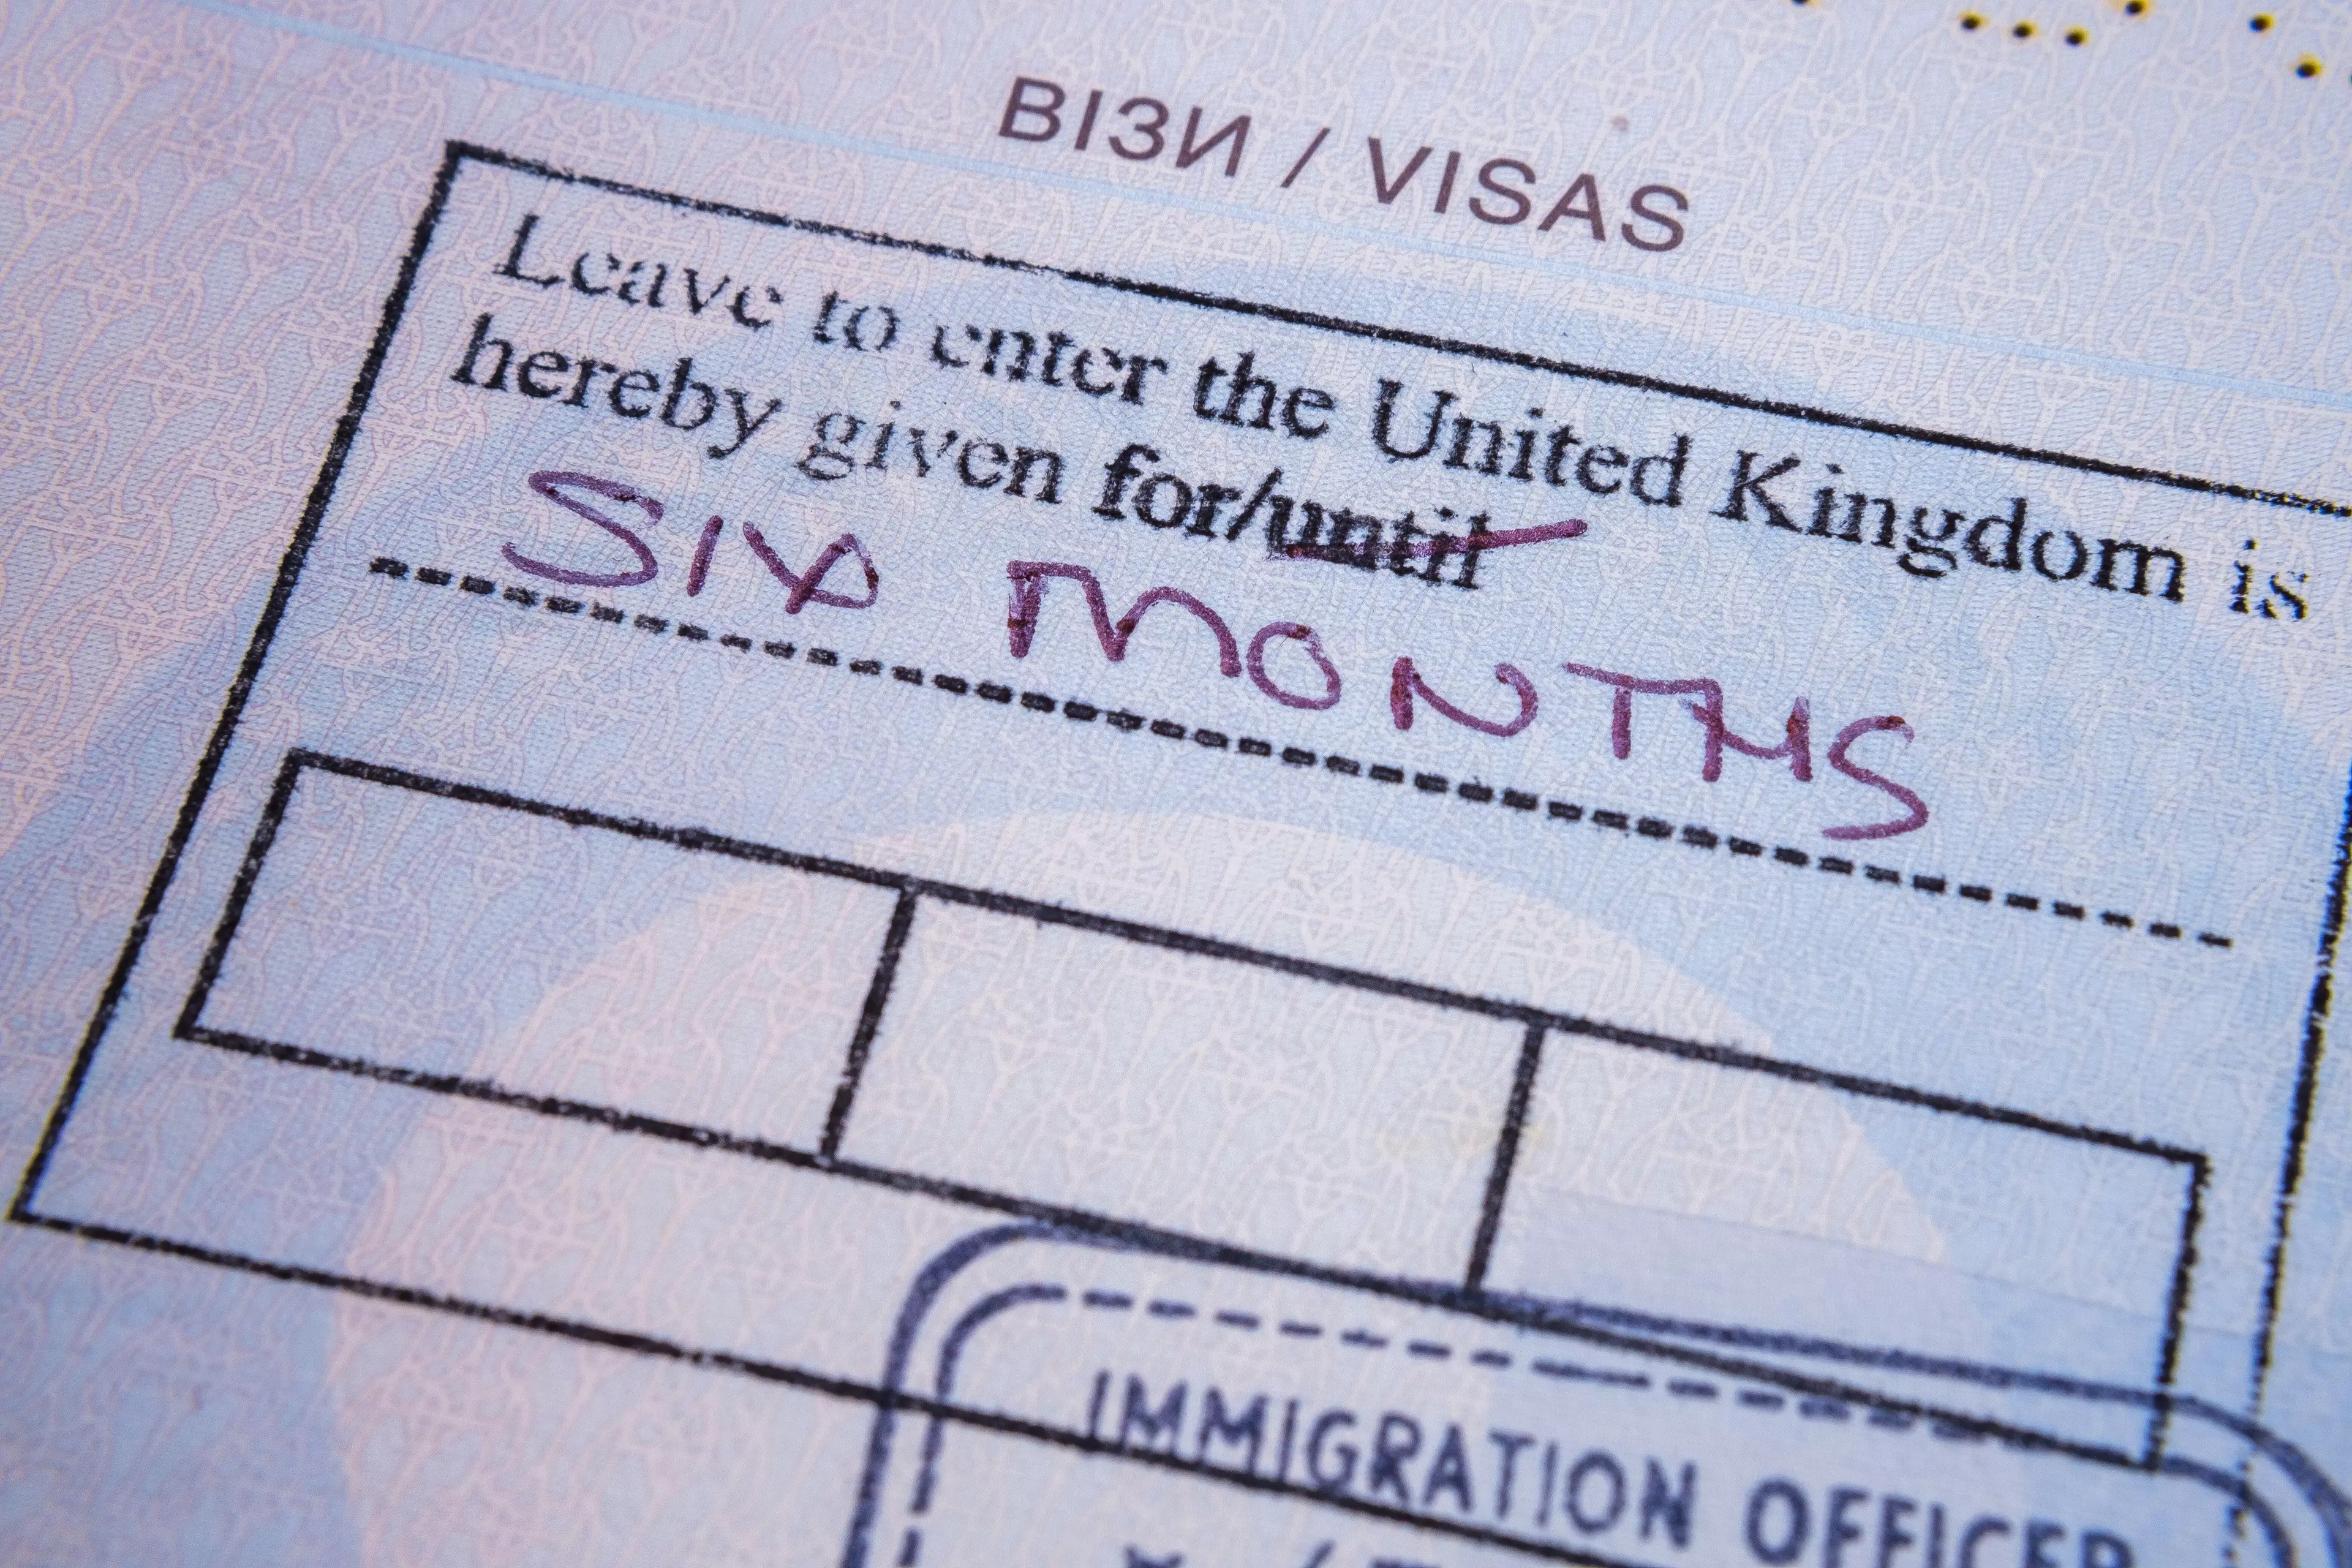 A visa granting access to the UK for six months.